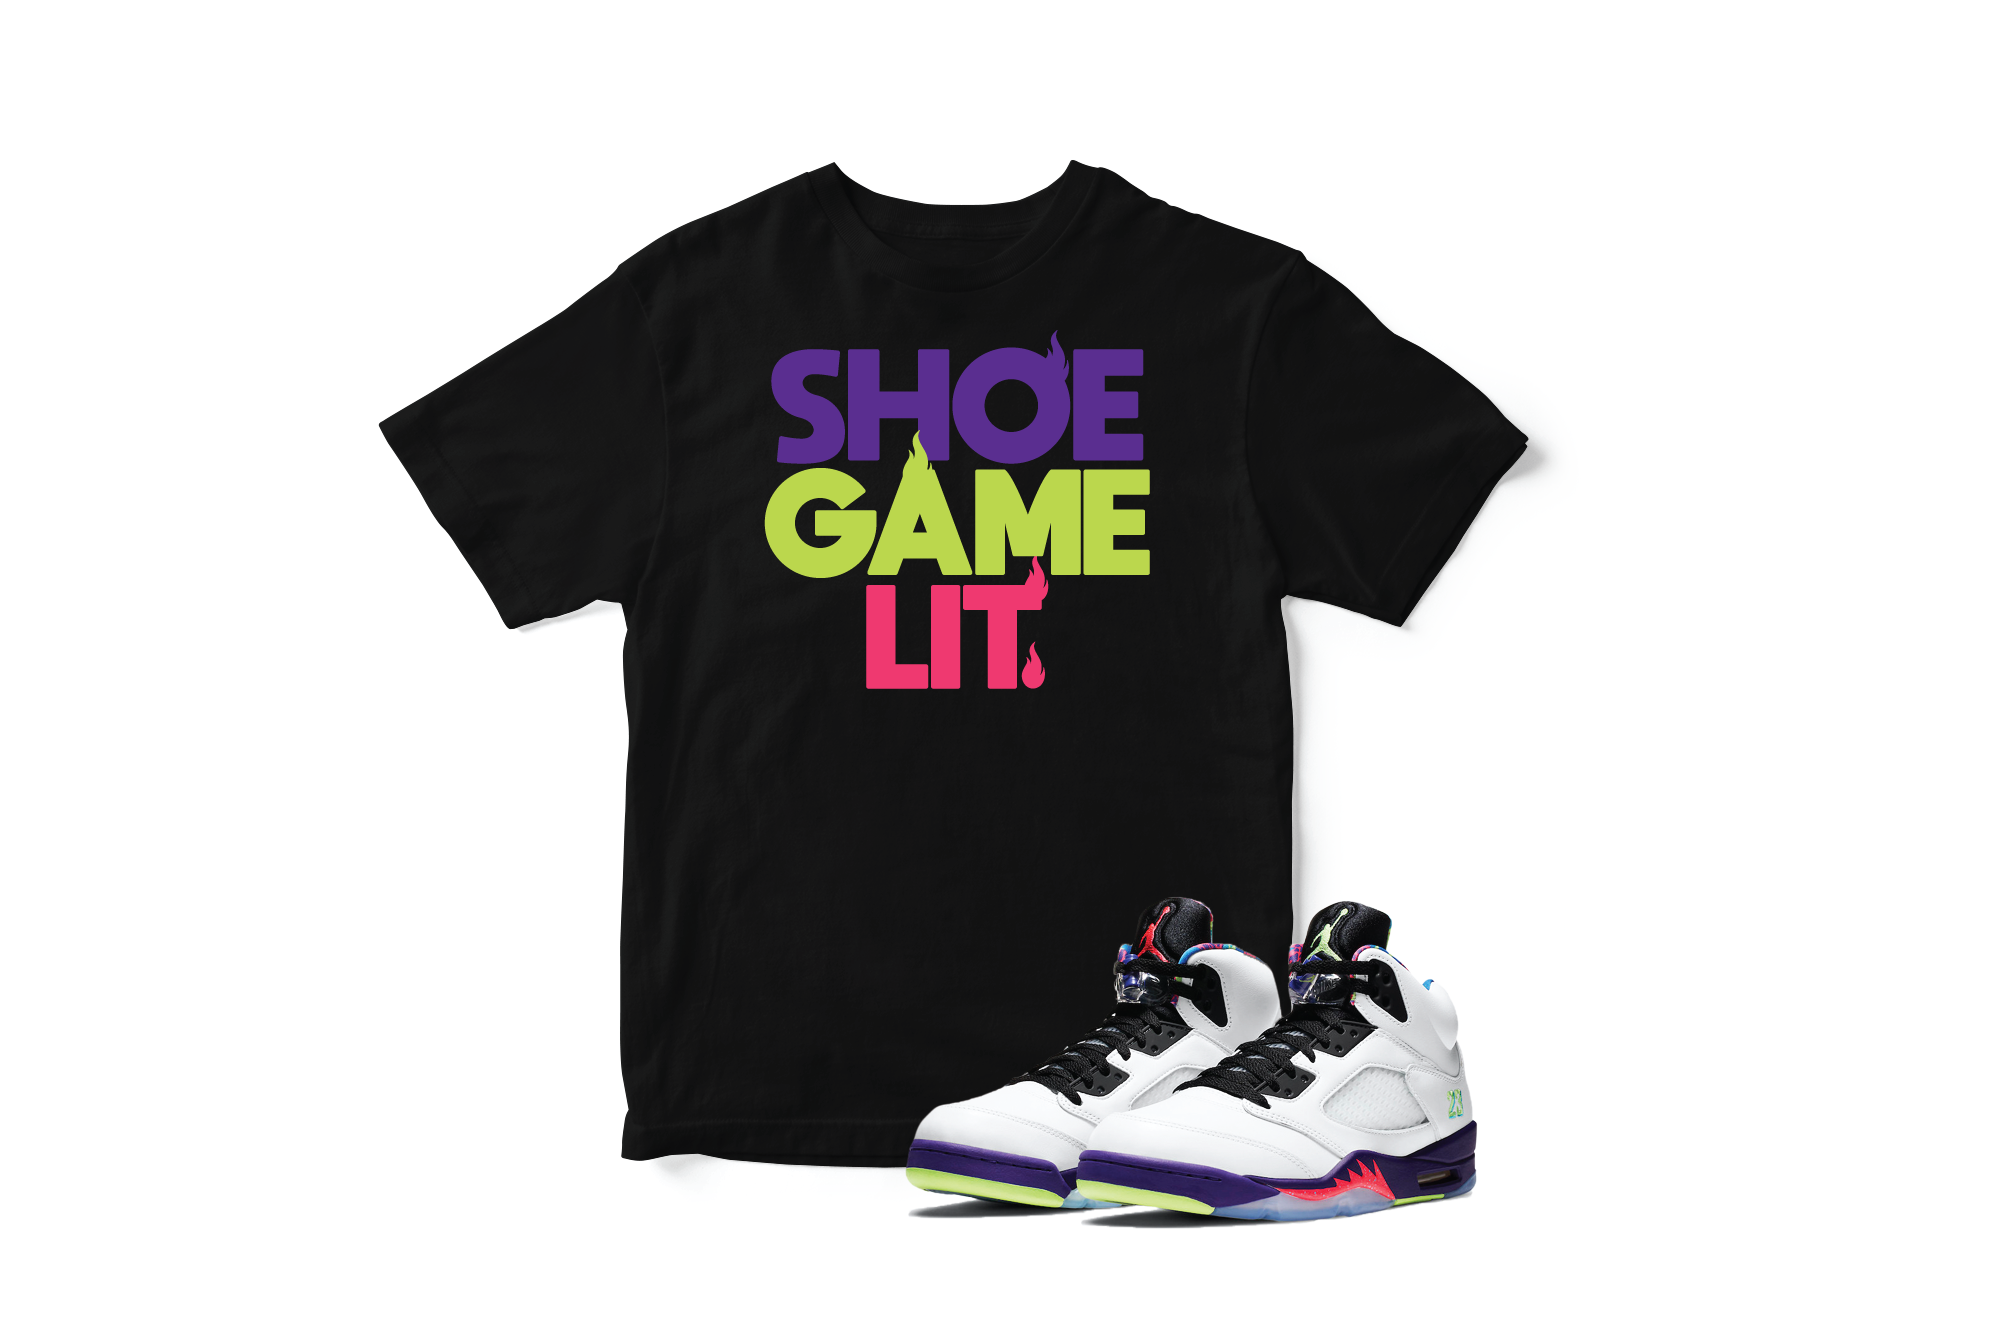 'Shoe Game Lit' in Ghost Green CW Short Sleeve Tee